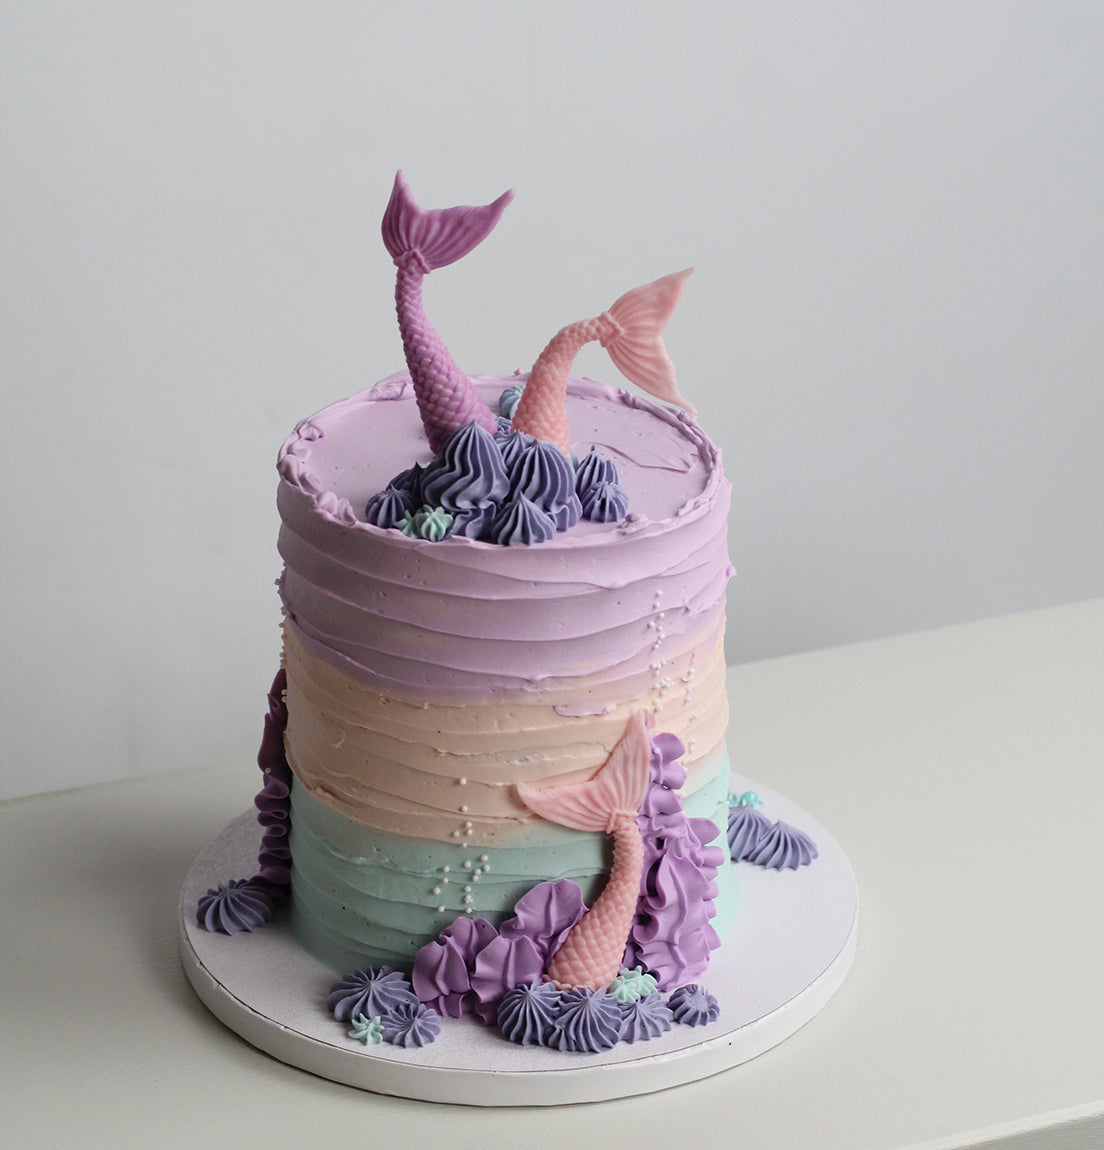 Mermaid underwater cake - decoated with sugar nermaid tails, buttercream reef &amp; and pearls